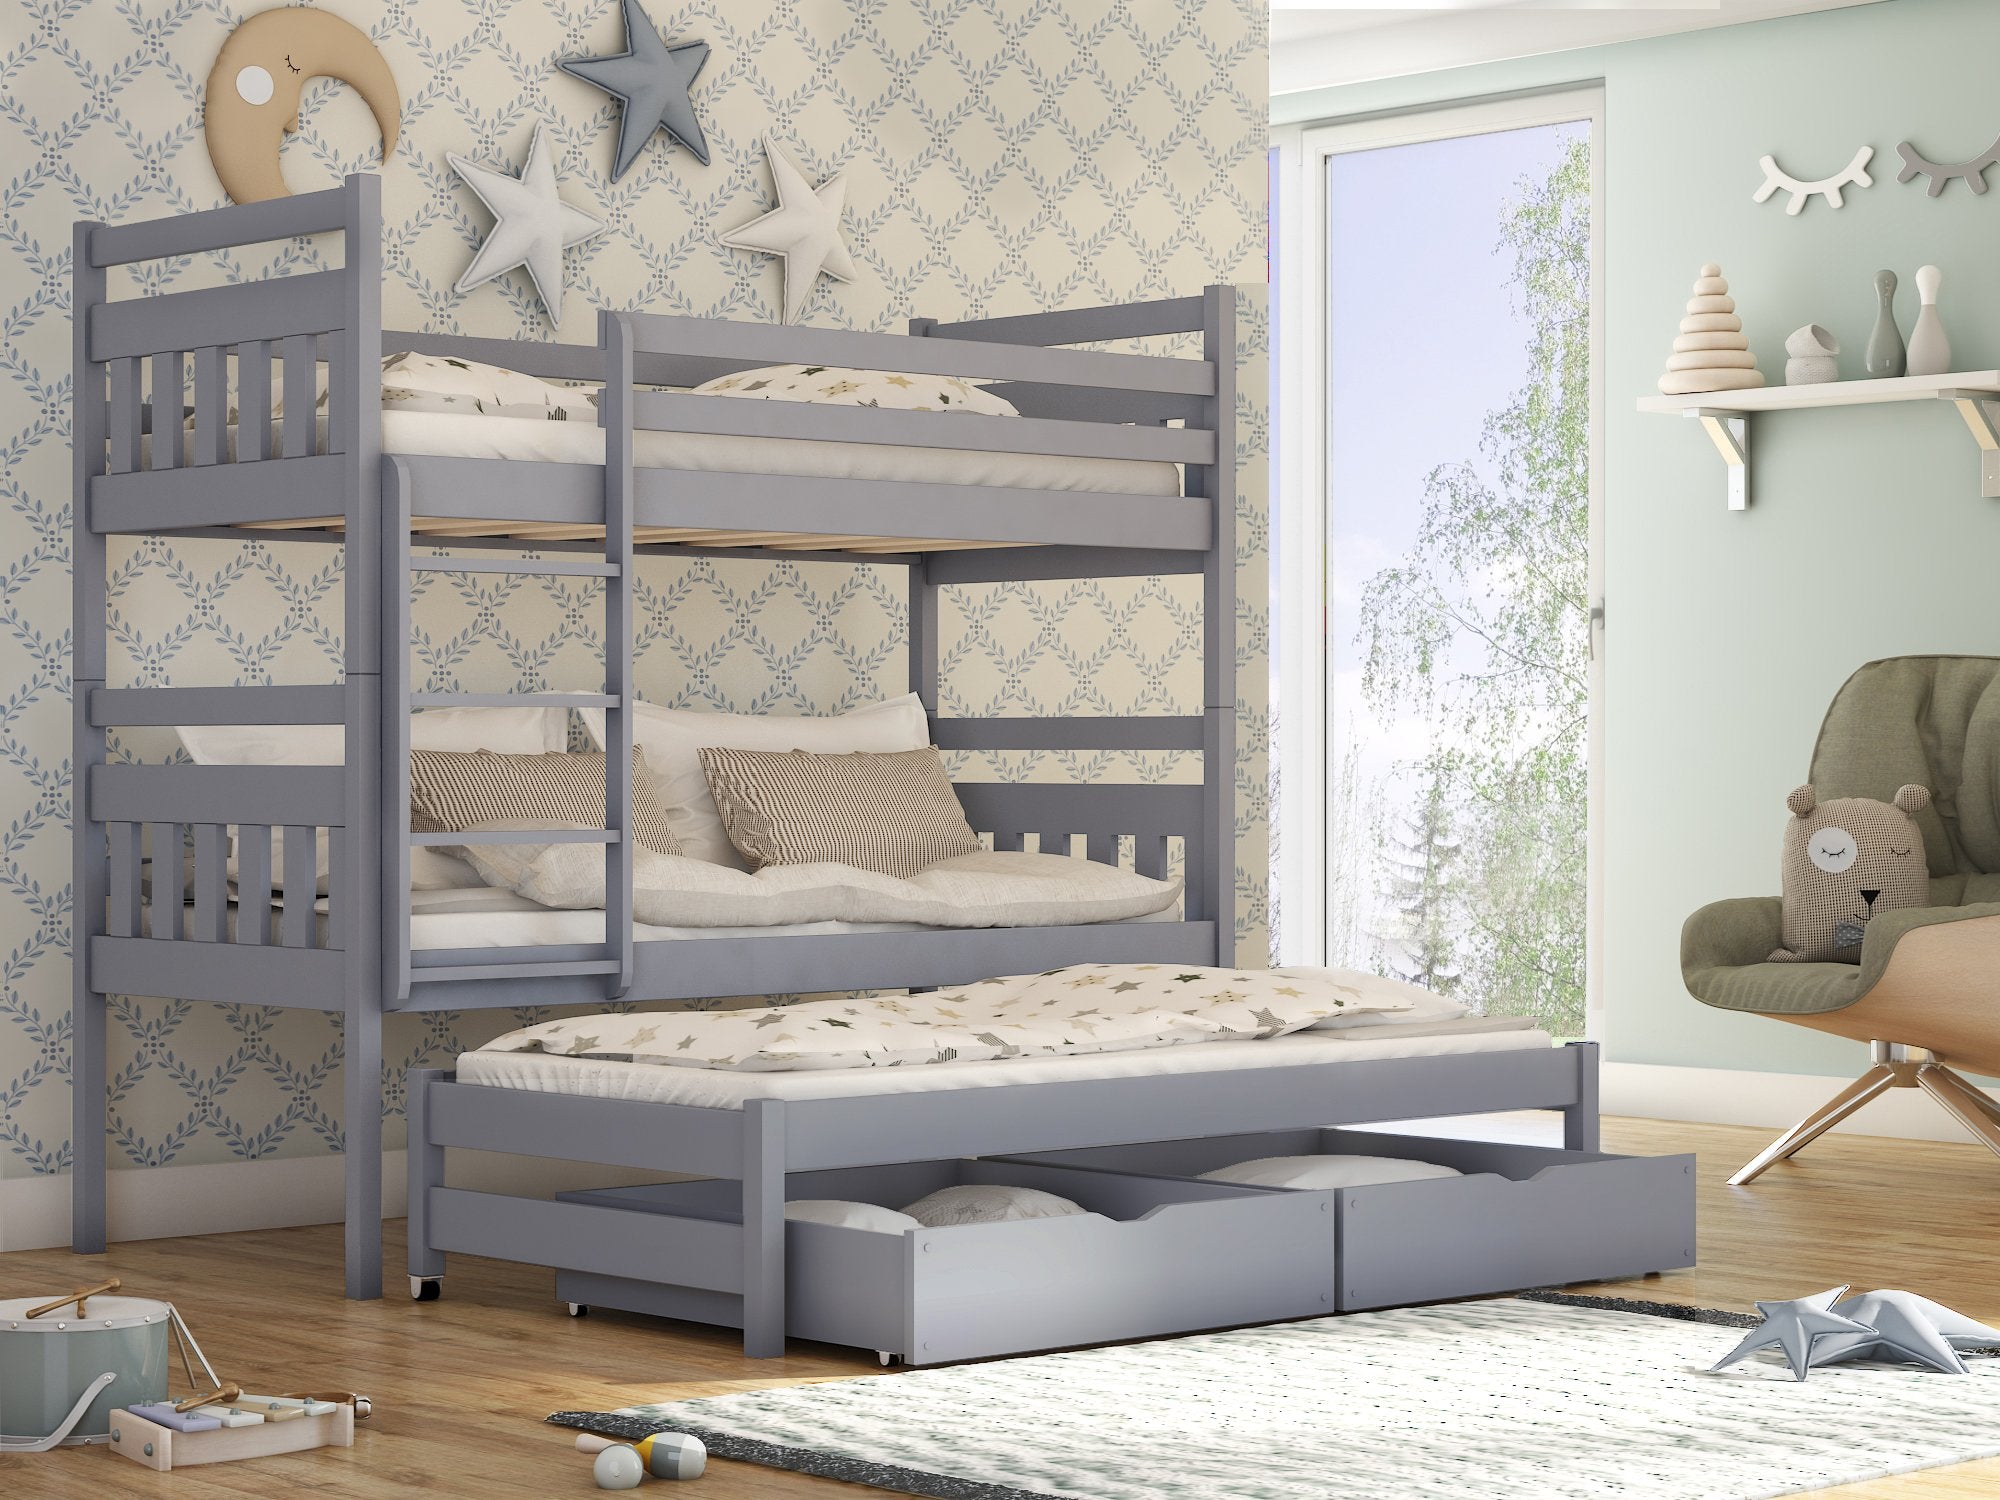 View Wooden Bunk Bed Seweryn with Trundle and Storage Grey Matt FoamBonnell Mattresses information